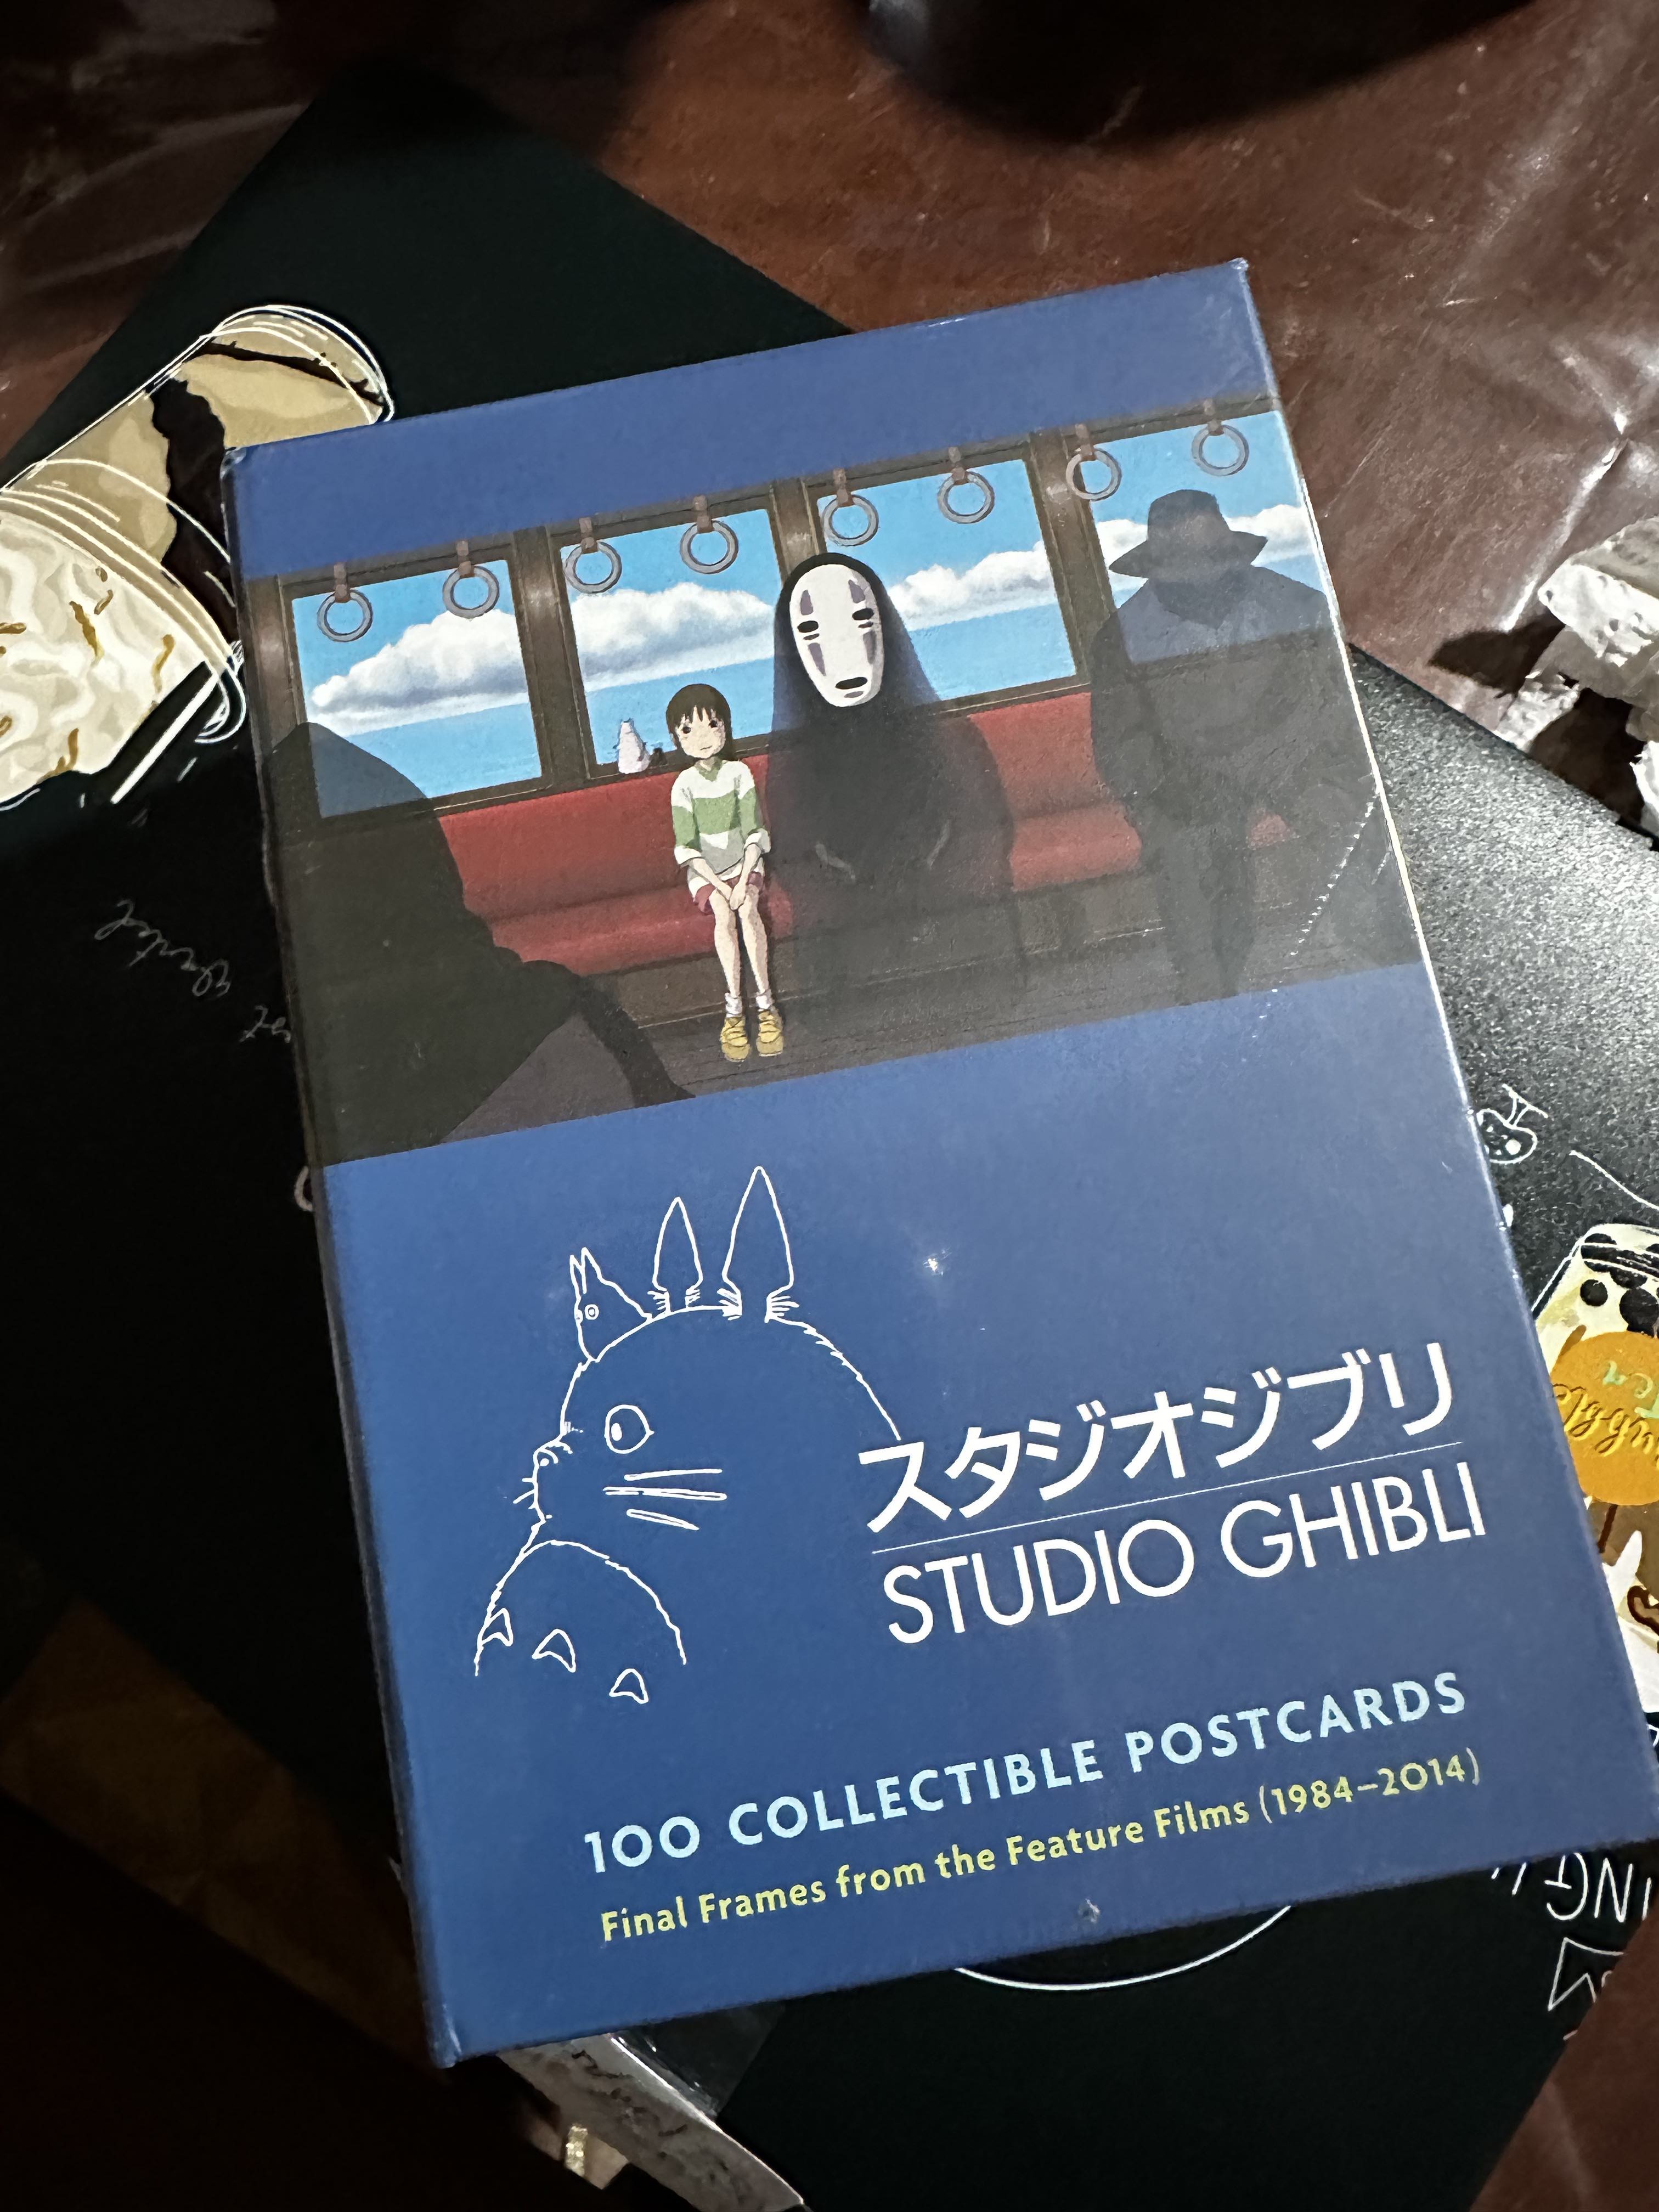 Studio Ghibli. 100 Collectible Postcards: Final frames from the